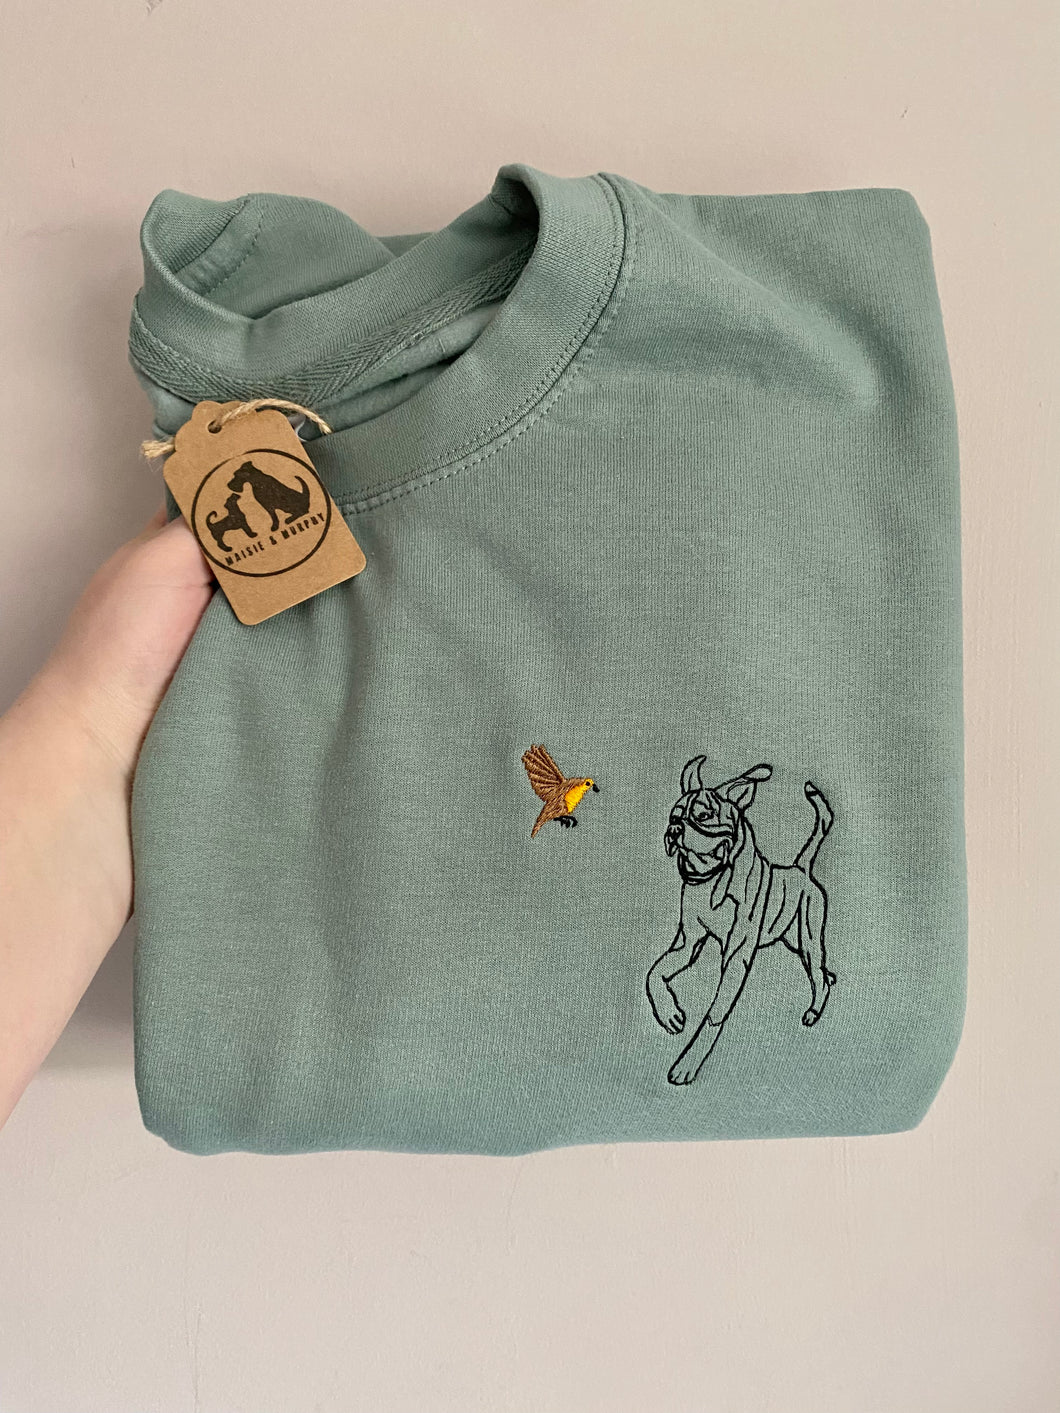 SILHOUETTE STYLE Robin Dogs Sweatshirt - Embroidered sweater for dog lovers